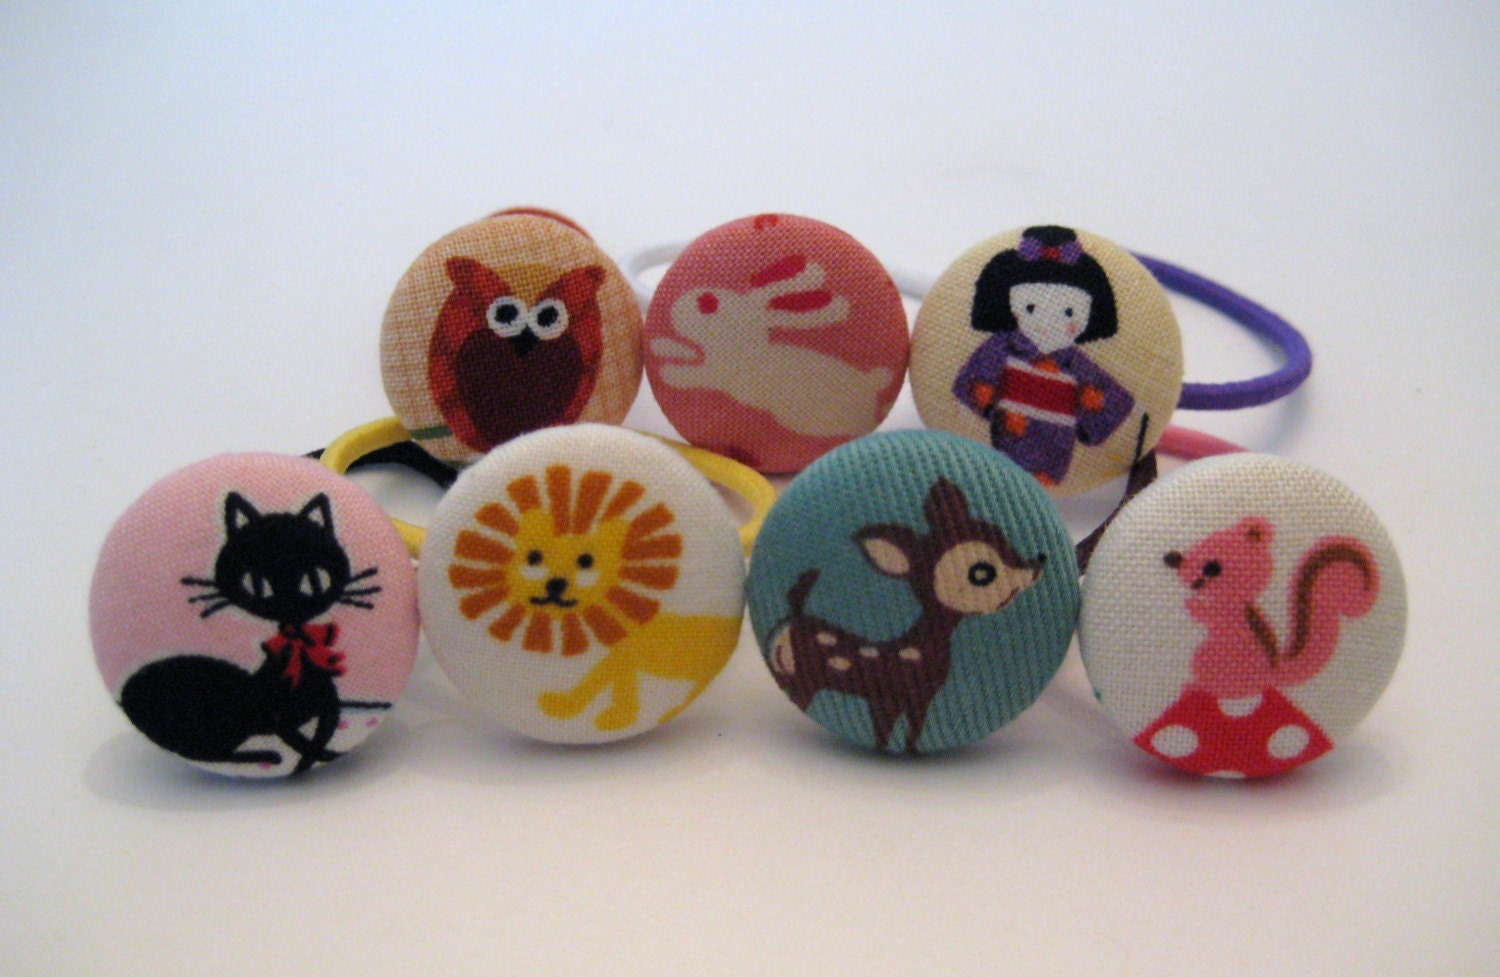 My Little Friends - Seven Days of Fun - Adorable and Fun Ponytail Holders for Little Girls